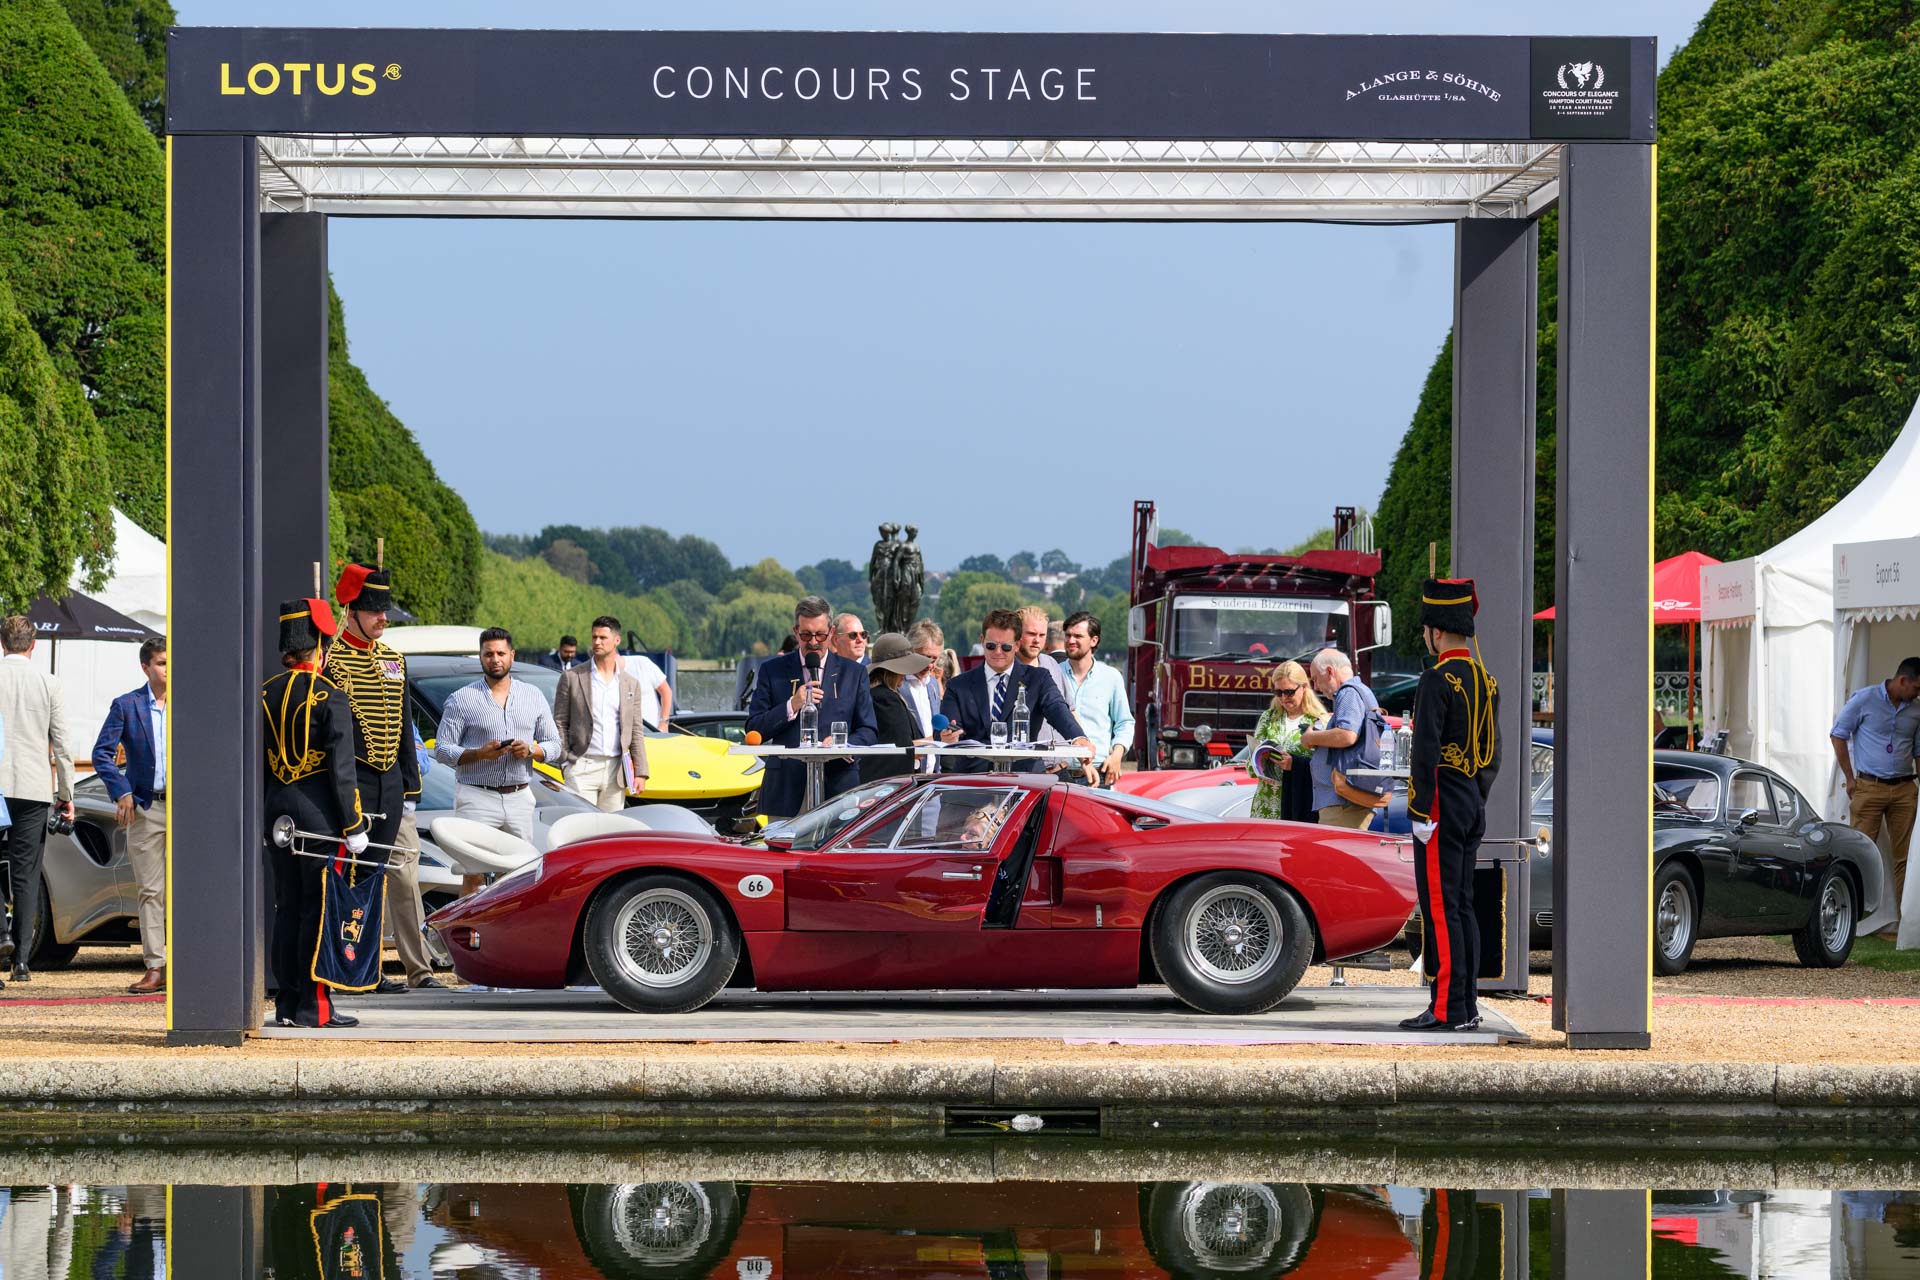 The Concours Stage